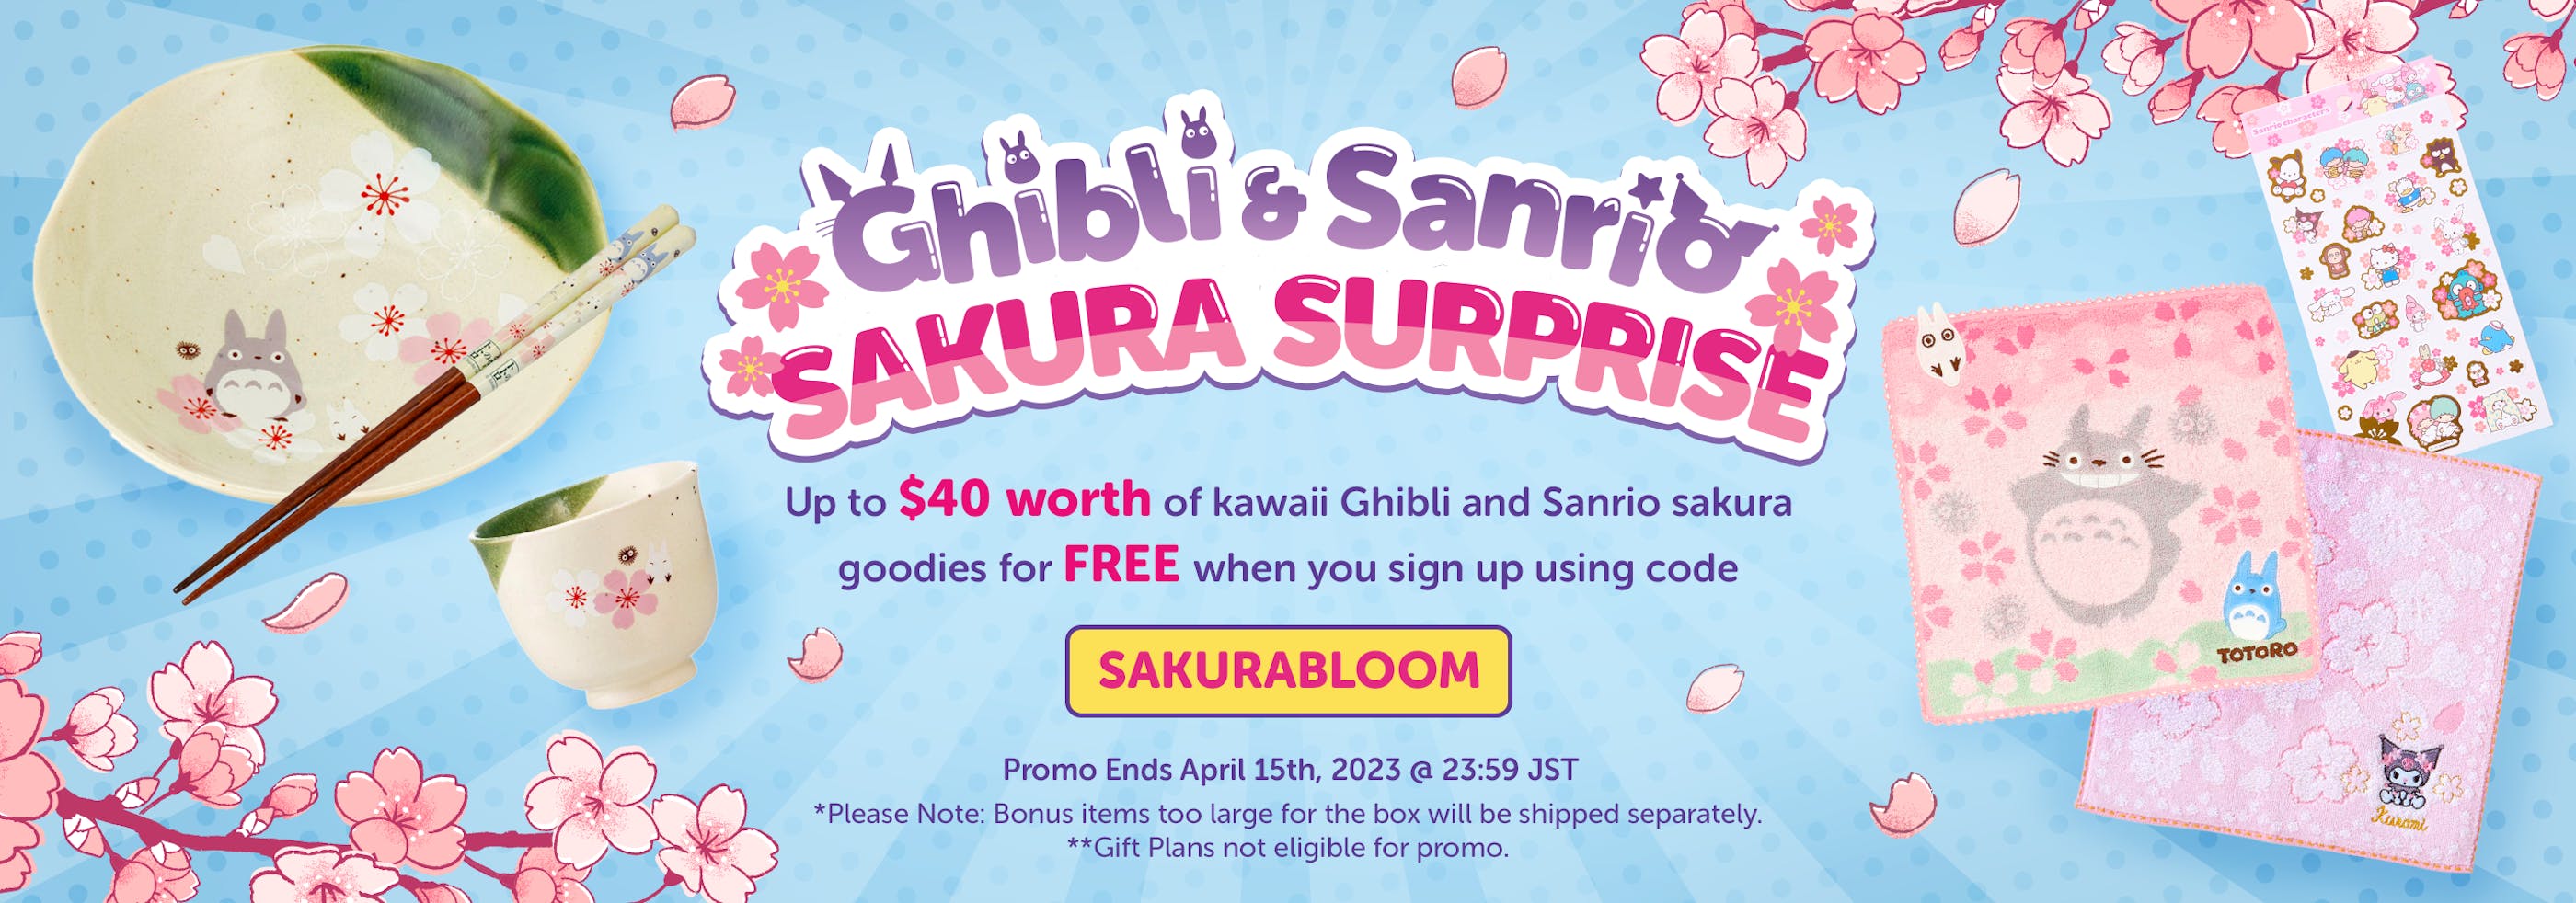 Sign up to YumeTwins with code SAKURABLOOM for up to $40 worth of FREE Ghibli & Sanrio Sakura bonus goodies like cereamic dishes and towels!